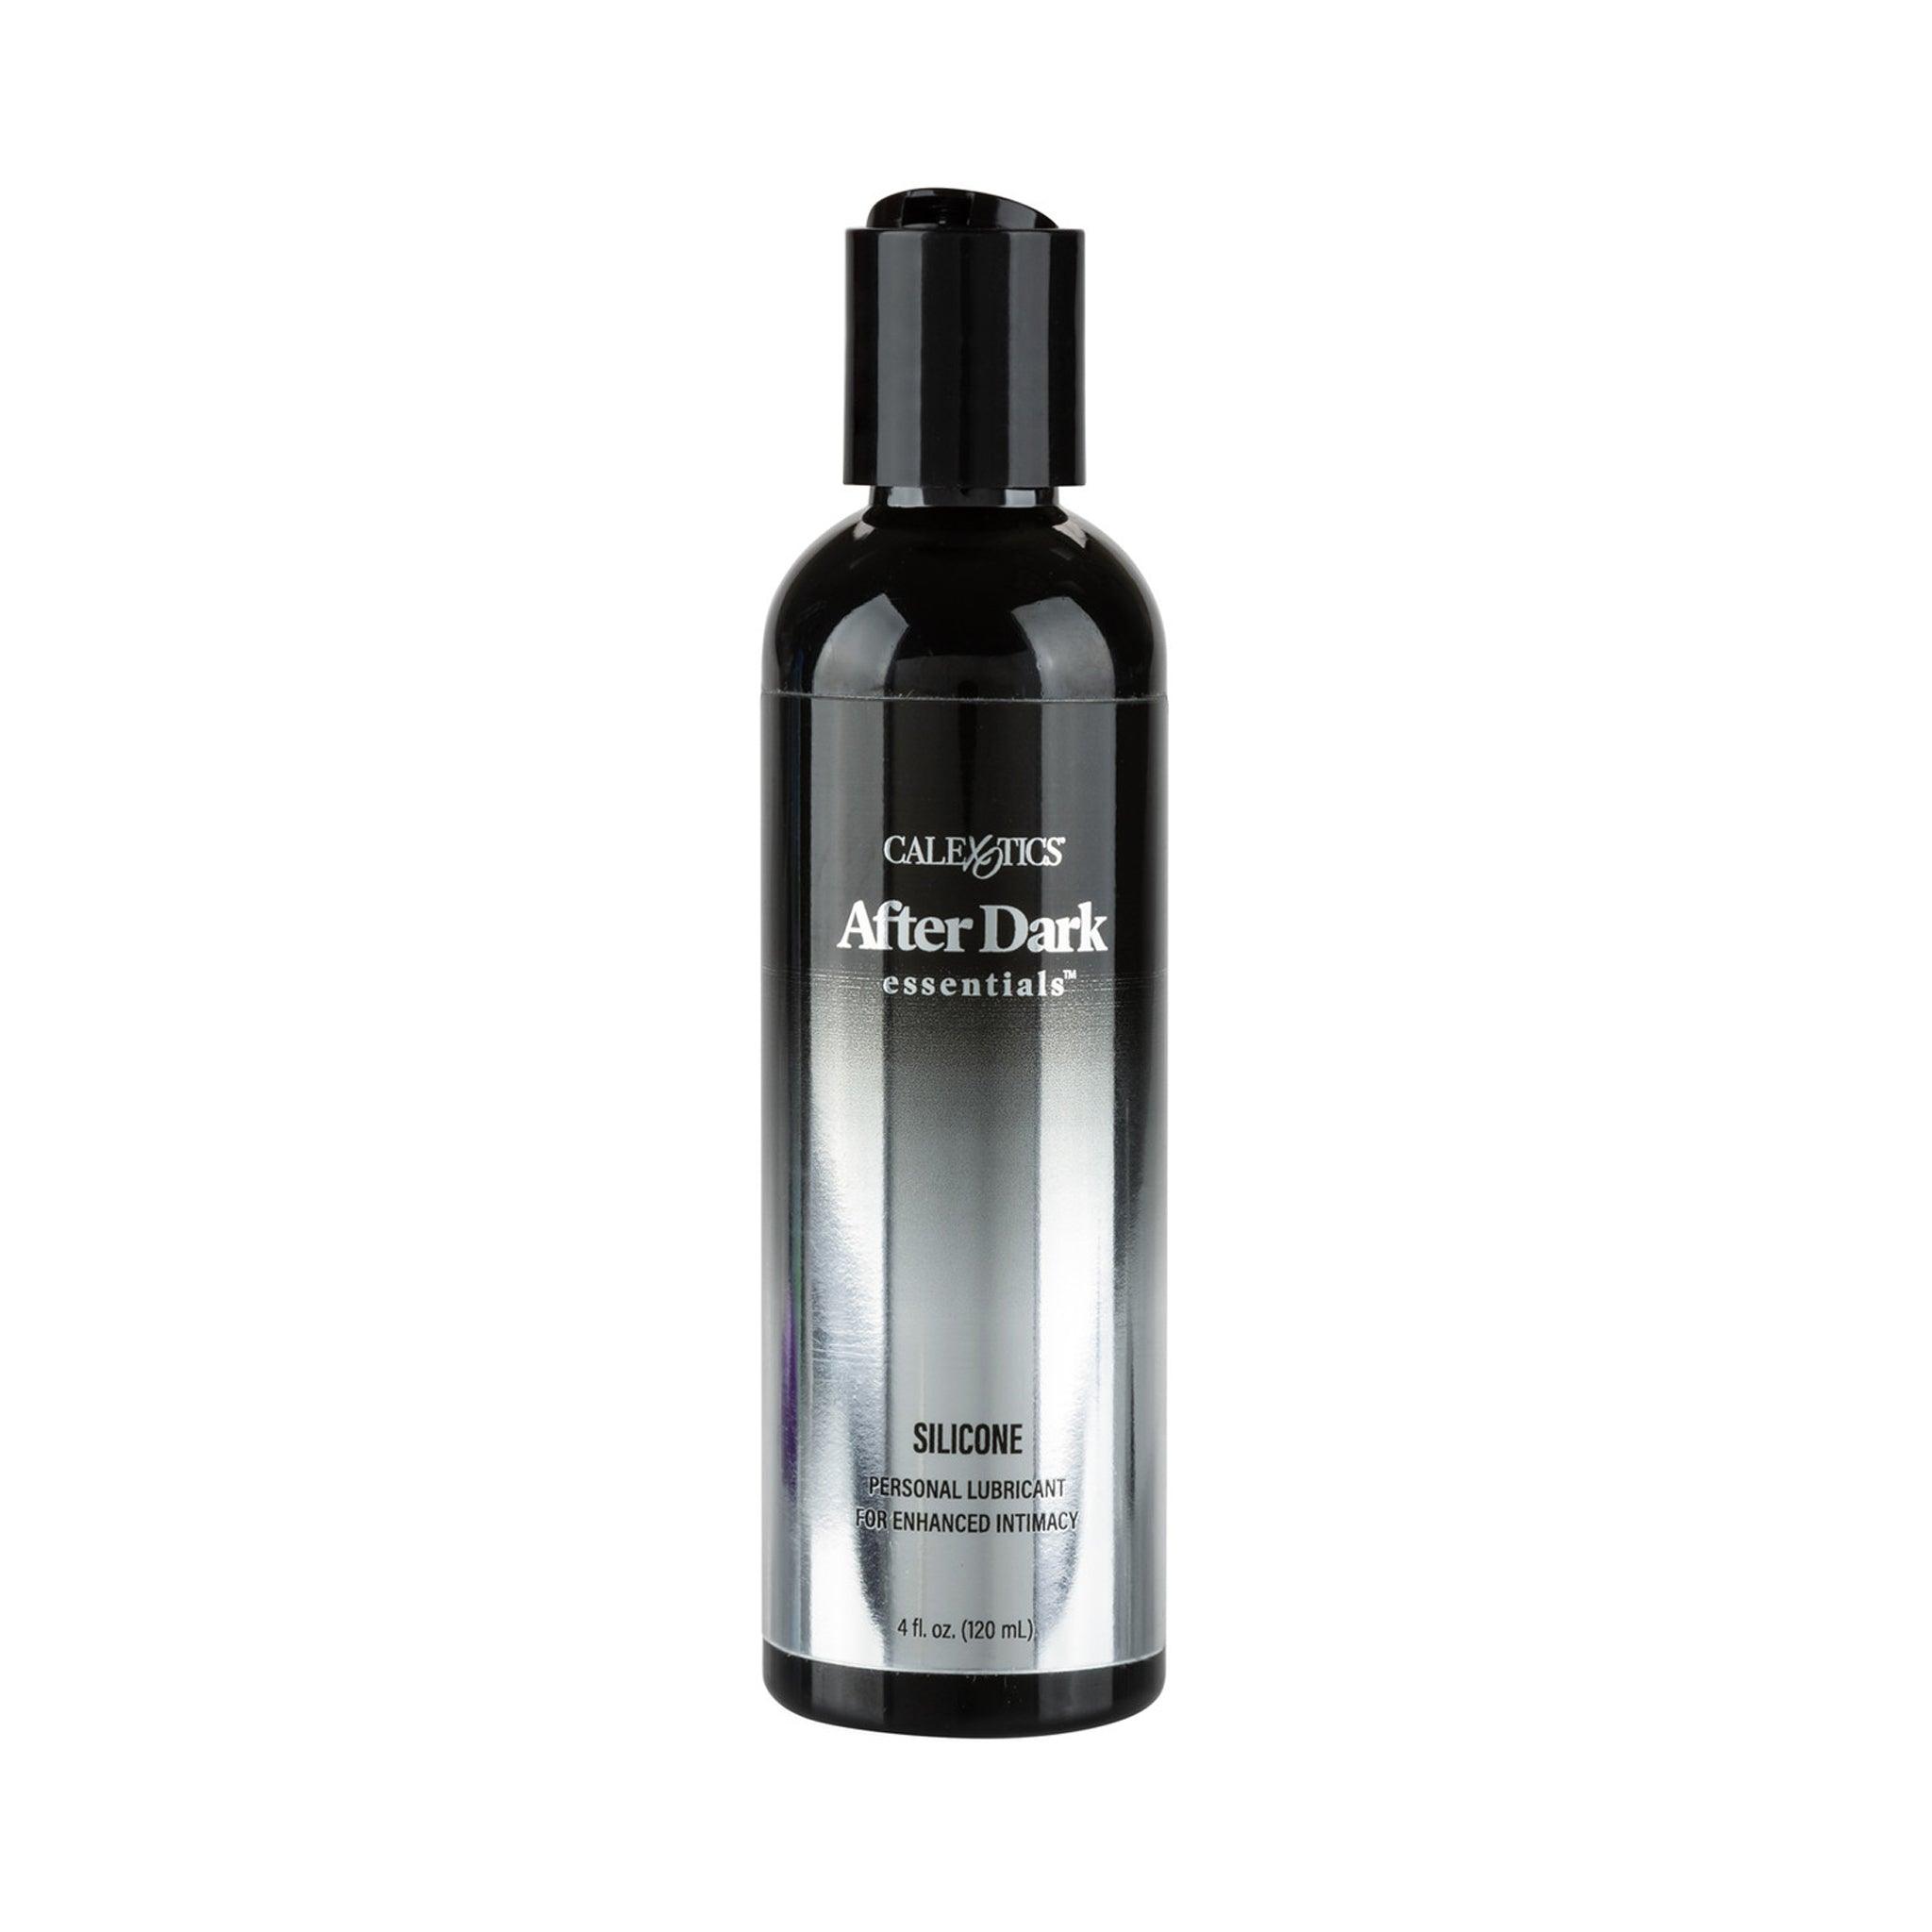 After Dark Essentials Silicone-Based Personal Lubricant 4 oz (120 mL) - CheapLubes.com